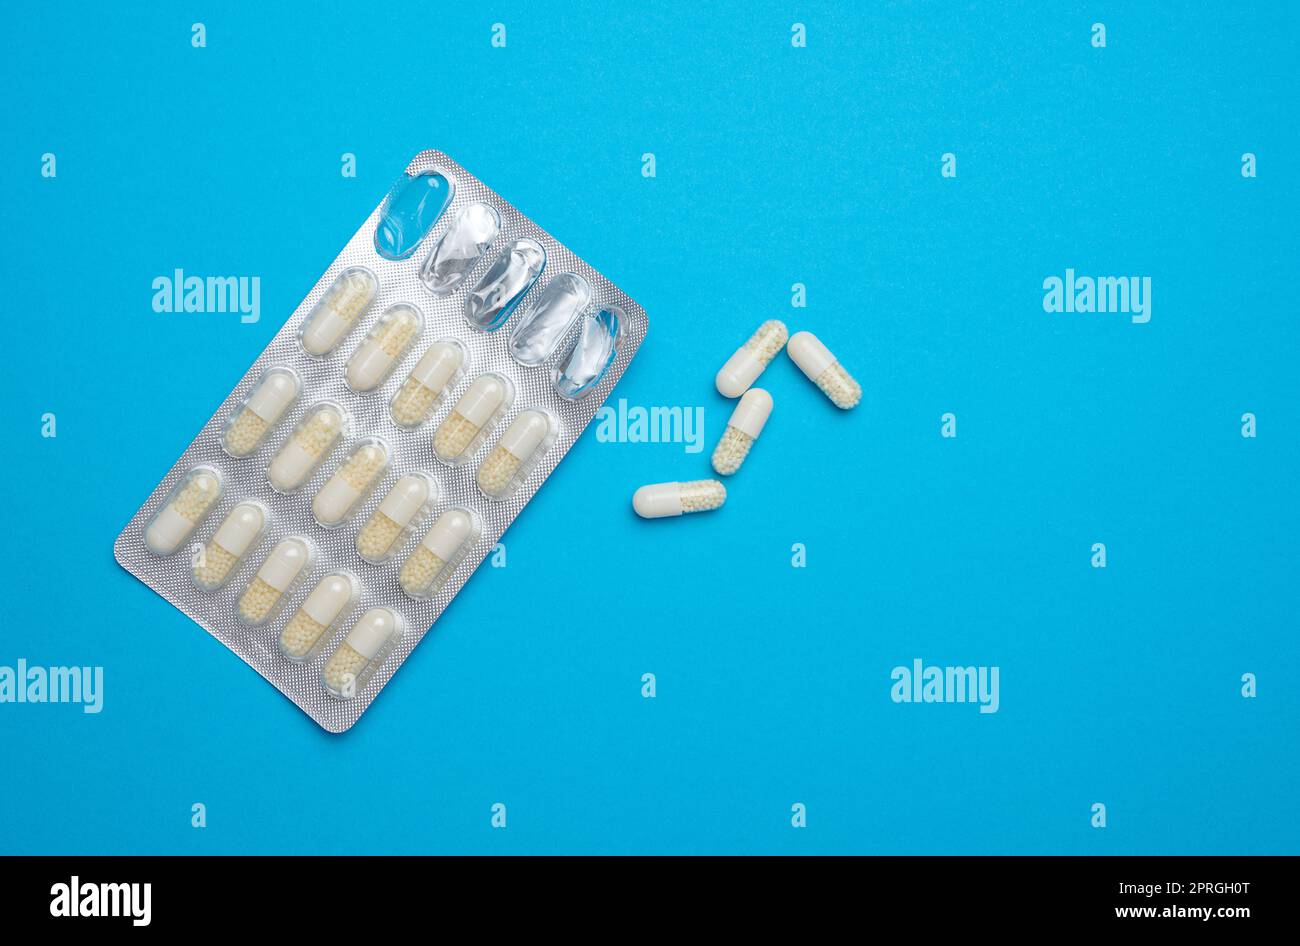 White oval pills and blister pack on a blue background Stock Photo